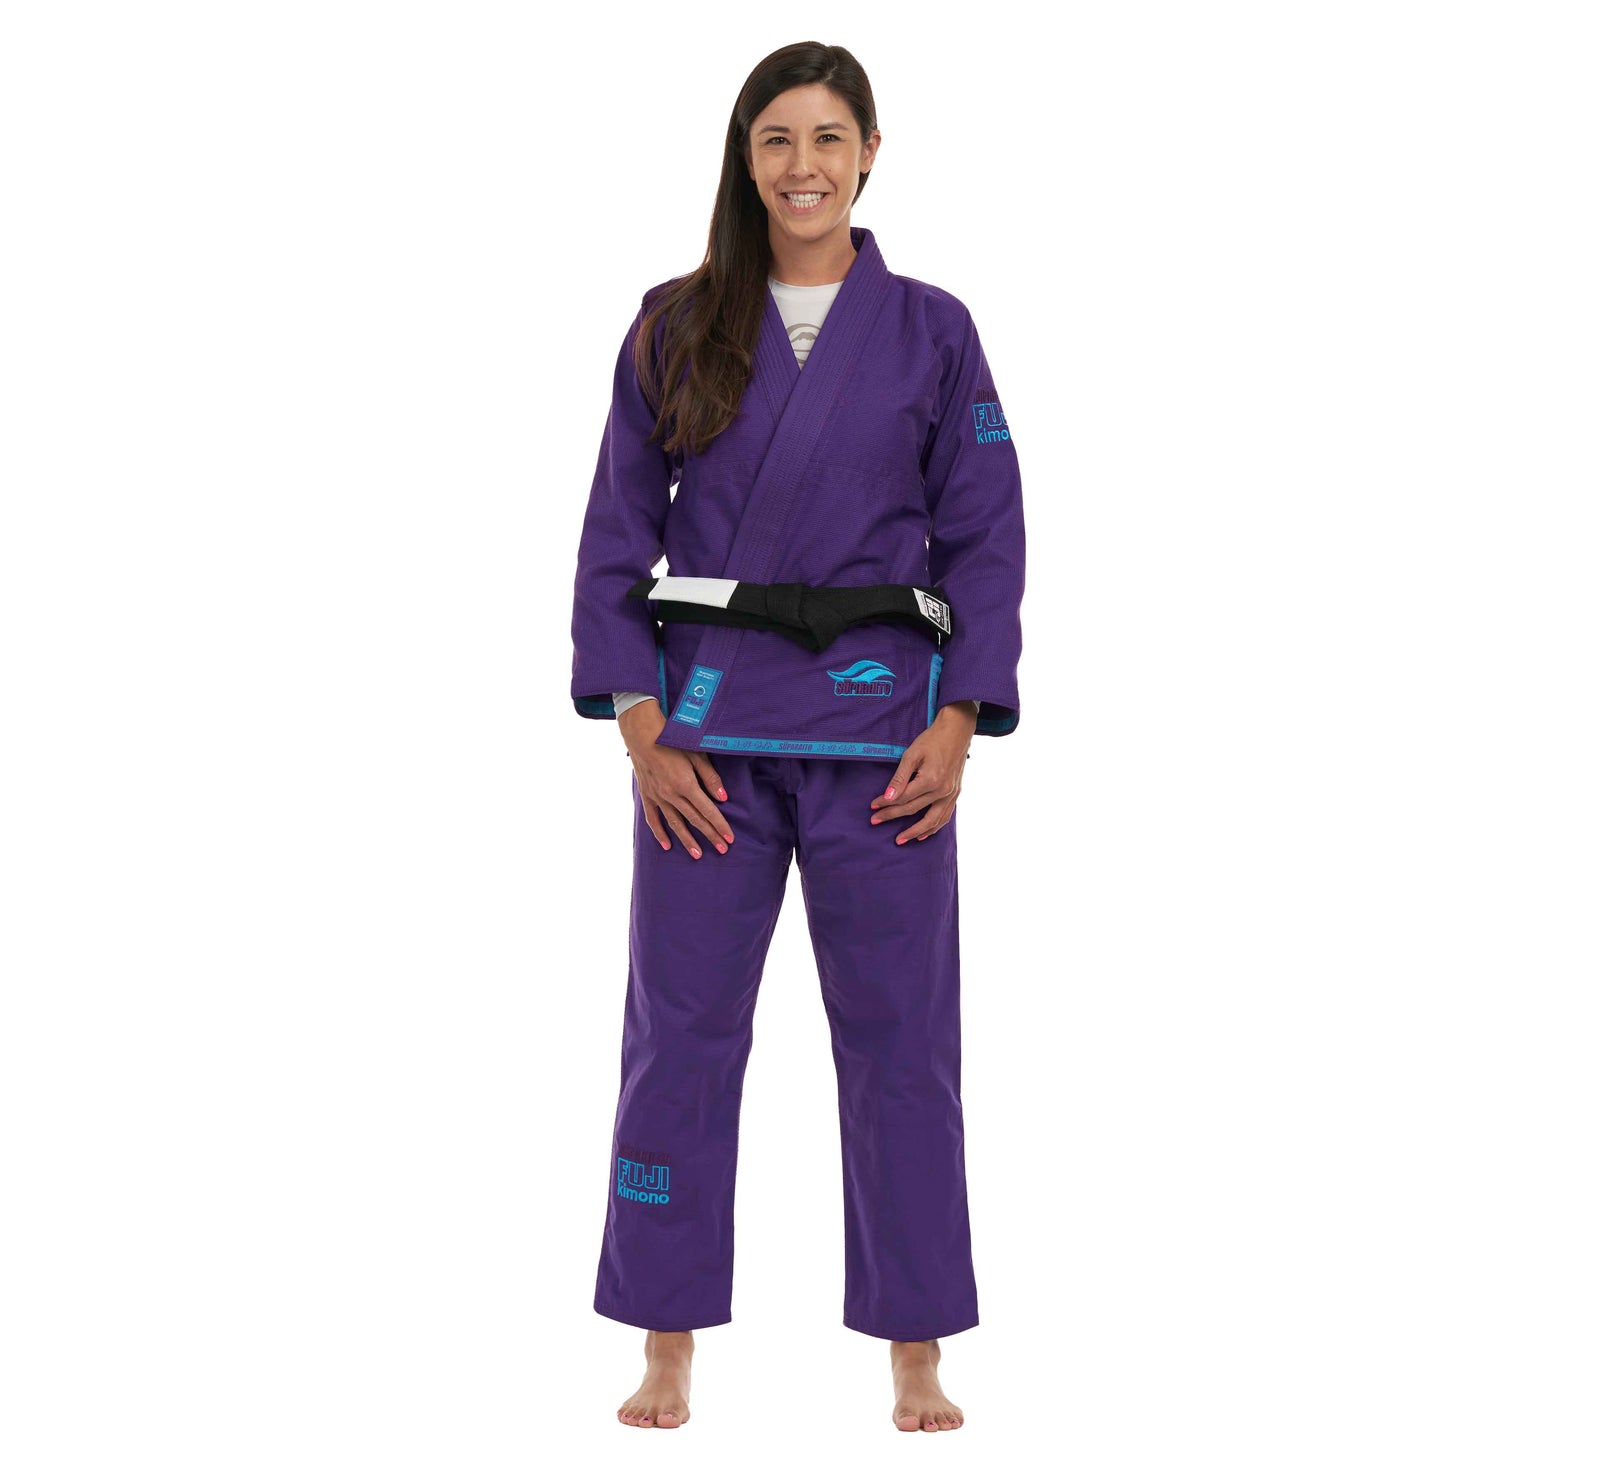 Wholesale purple boxing robes For Proper Martial Art Training Gear 